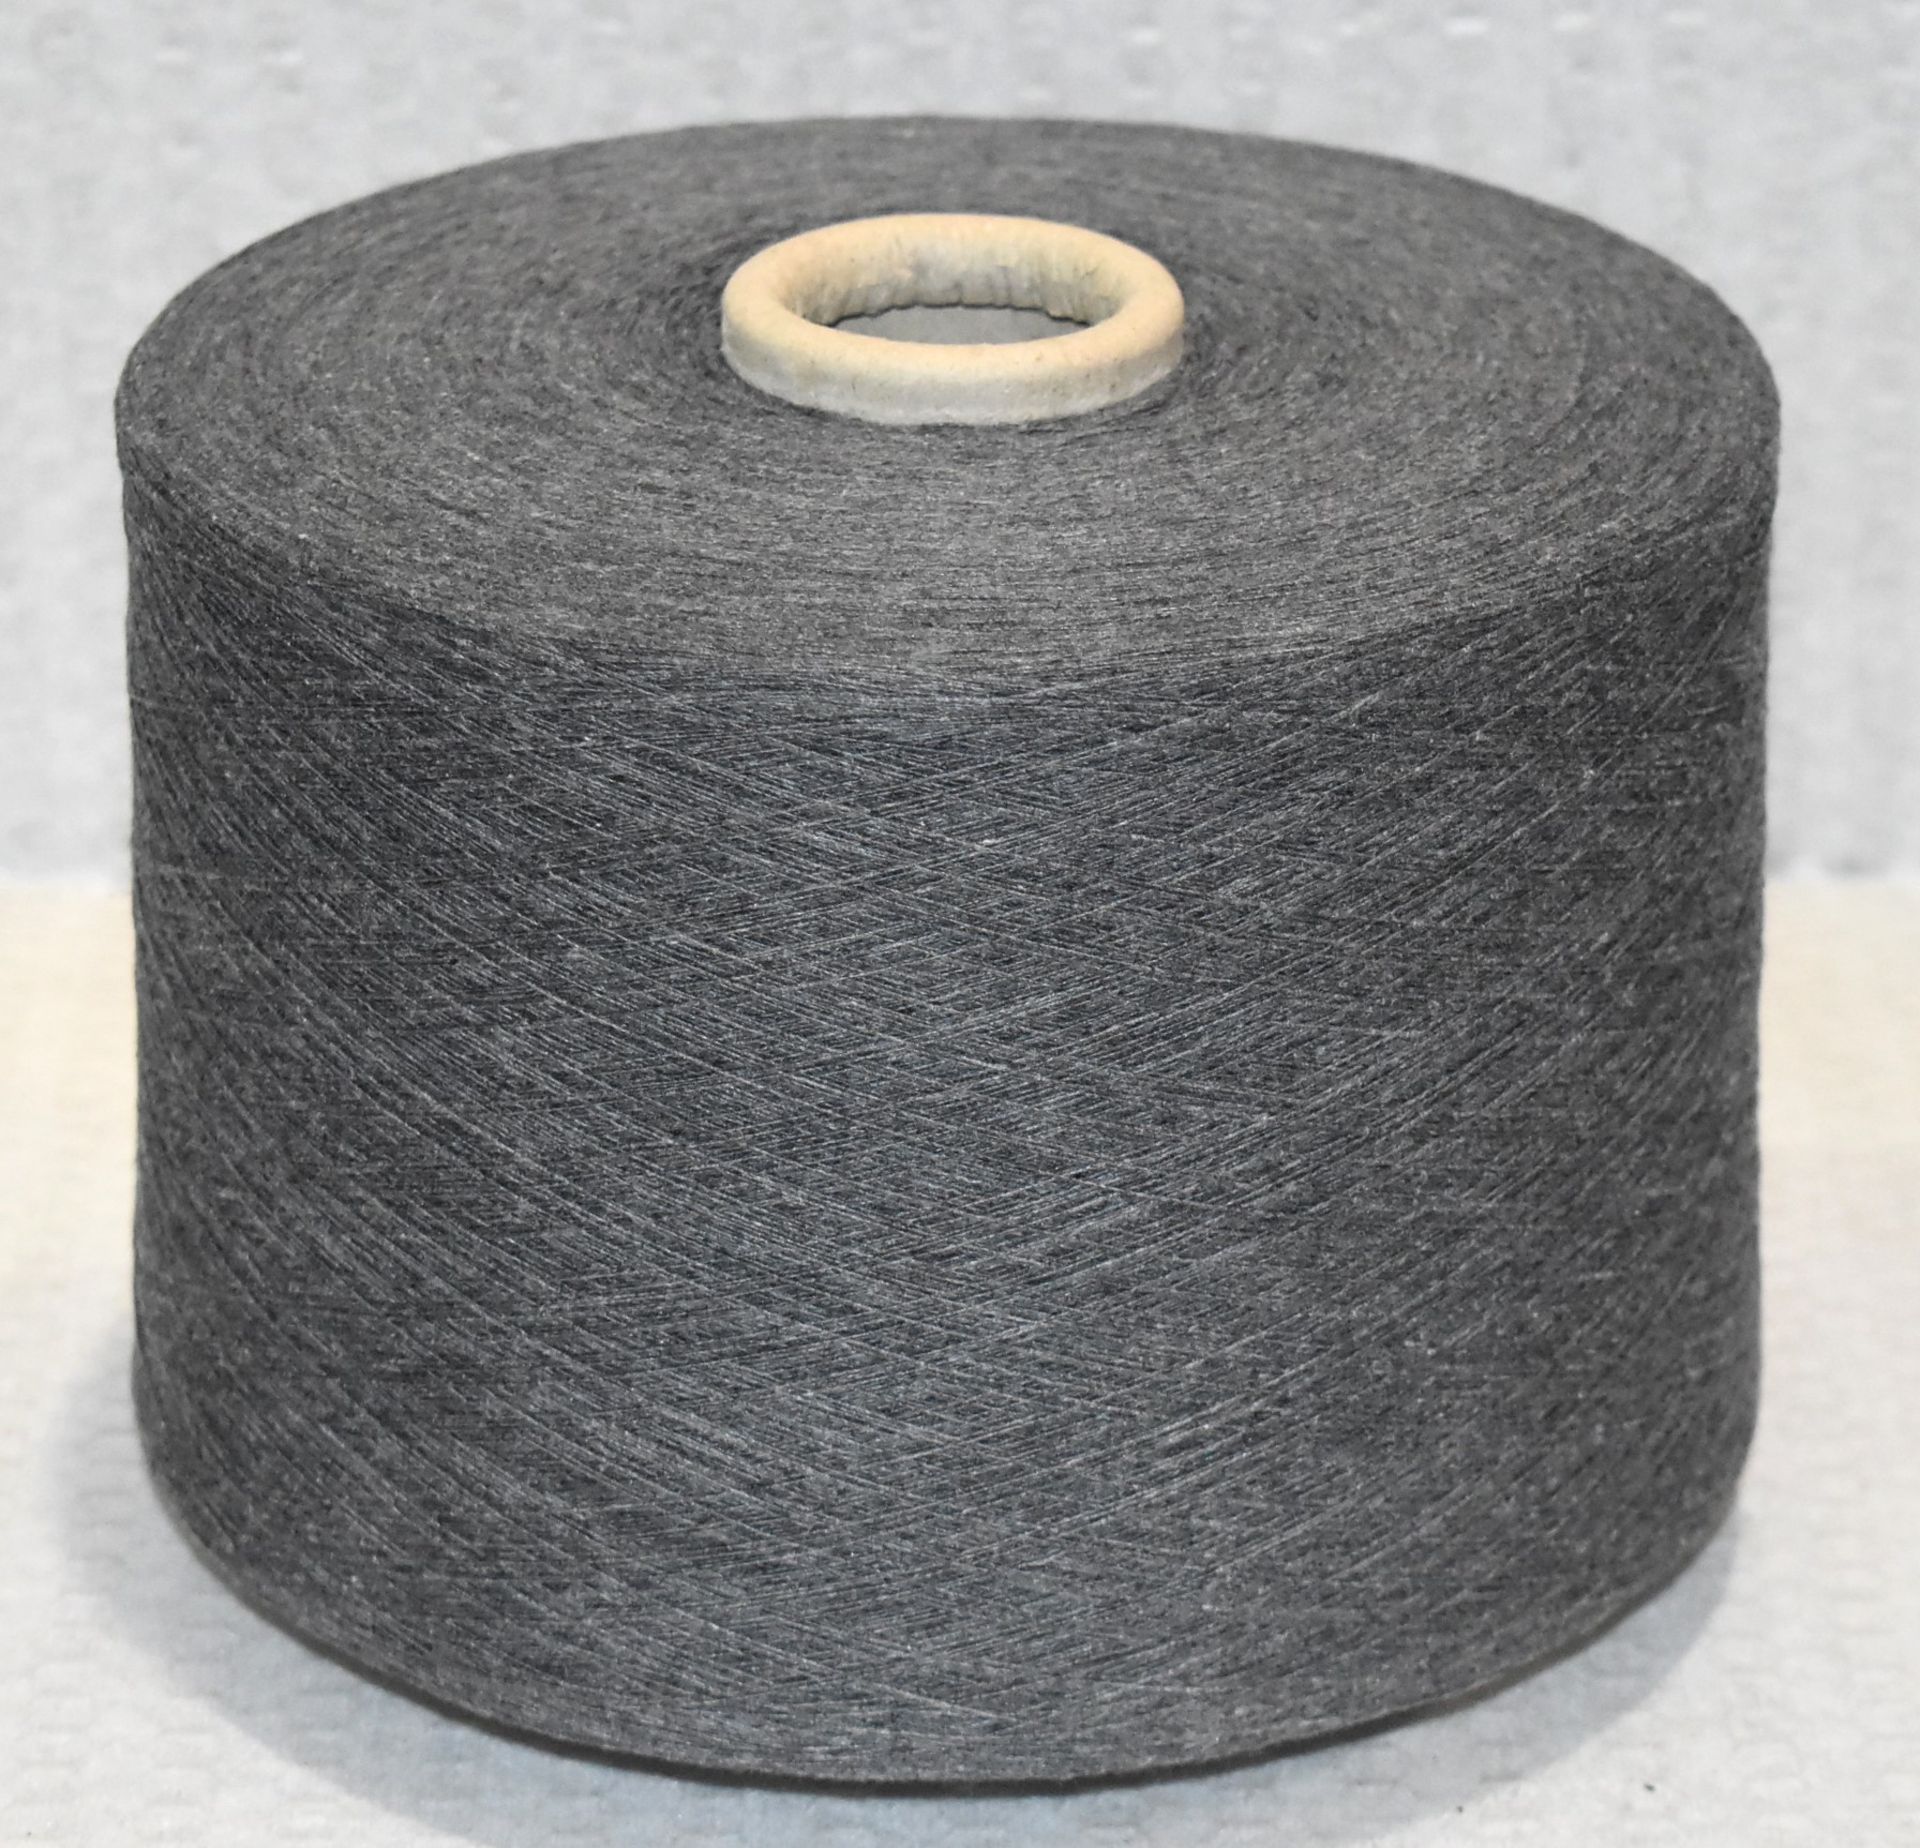 18 x Cones of 1/13 MicroCotton Knitting Yarn - Mid Grey - Approx Weight: 2,500g - New Stock ABL Yarn - Image 3 of 16